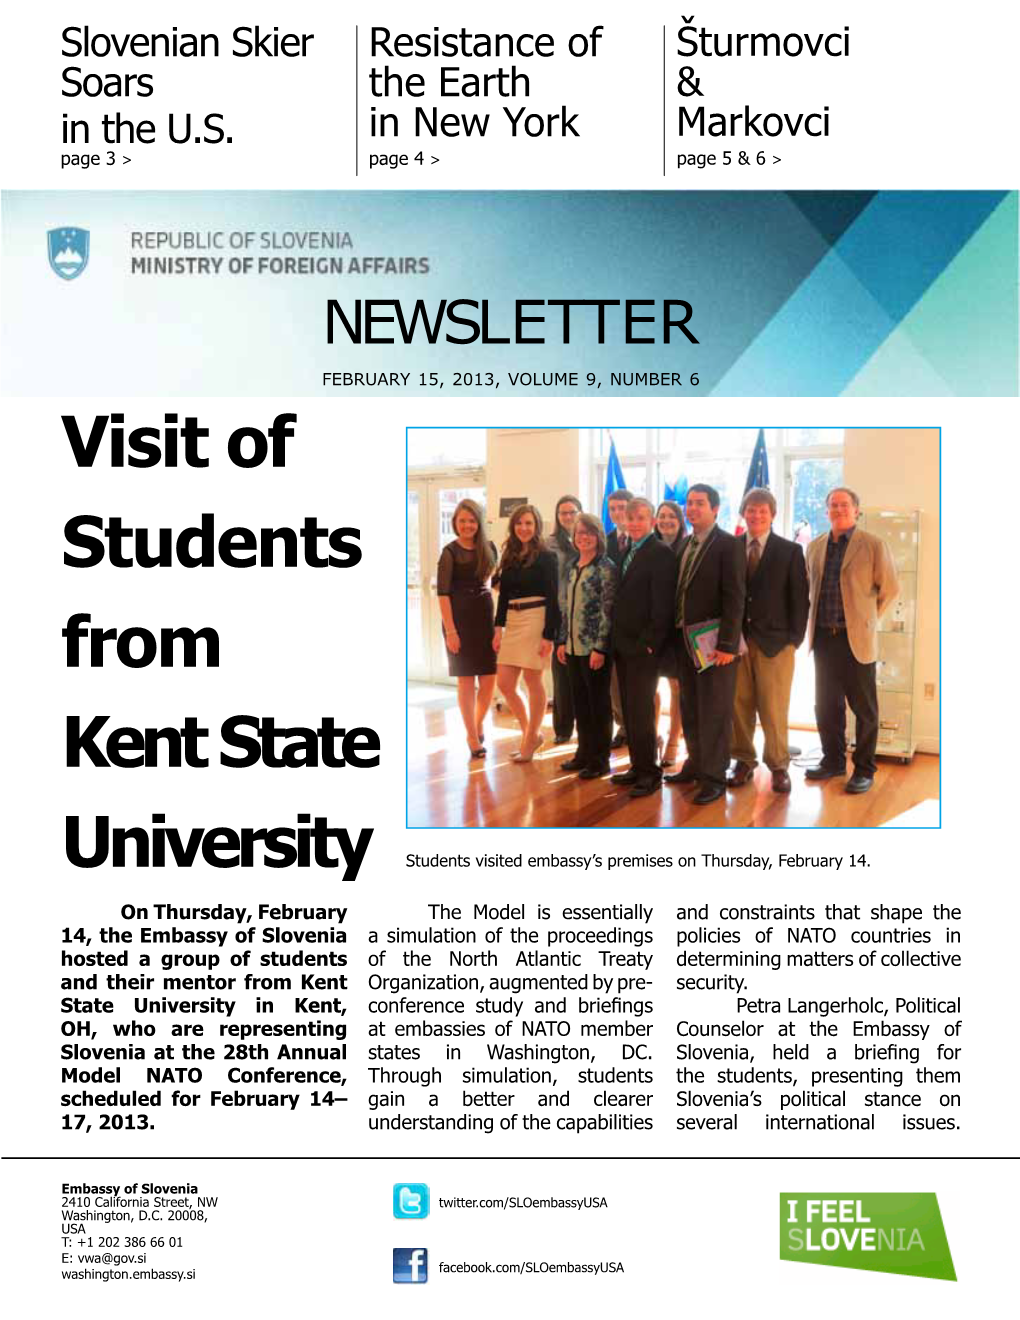 Visit of Students from Kent State